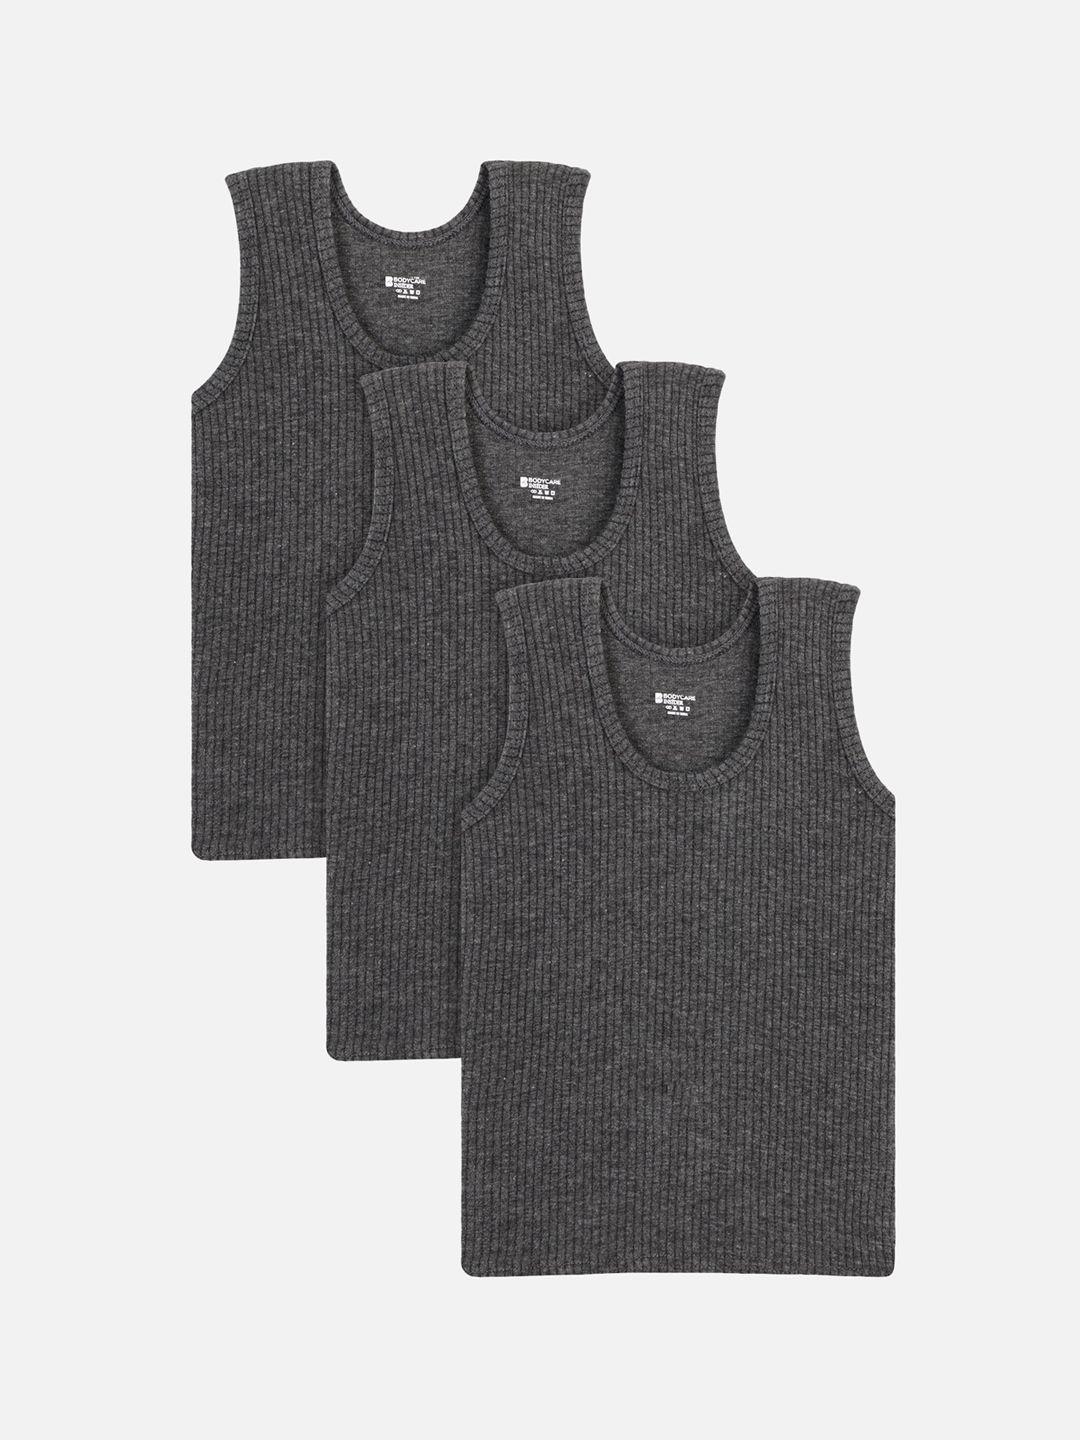 bodycare insider unisex kids pack of 3 charcoal grey self-design thermal tops